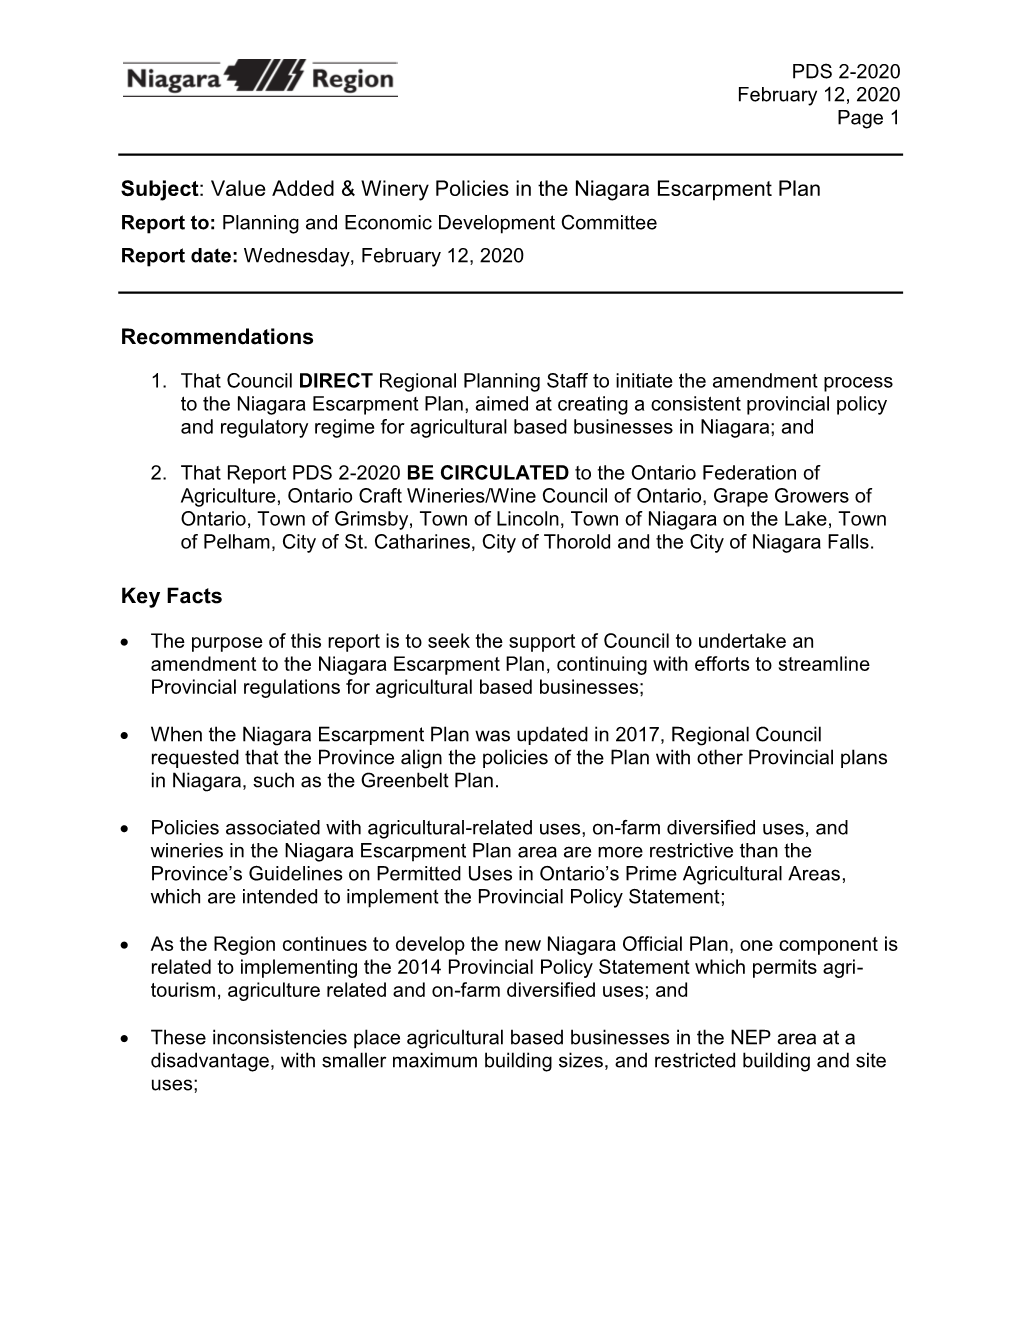 Value Added & Winery Policies in the Niagara Escarpment Plan